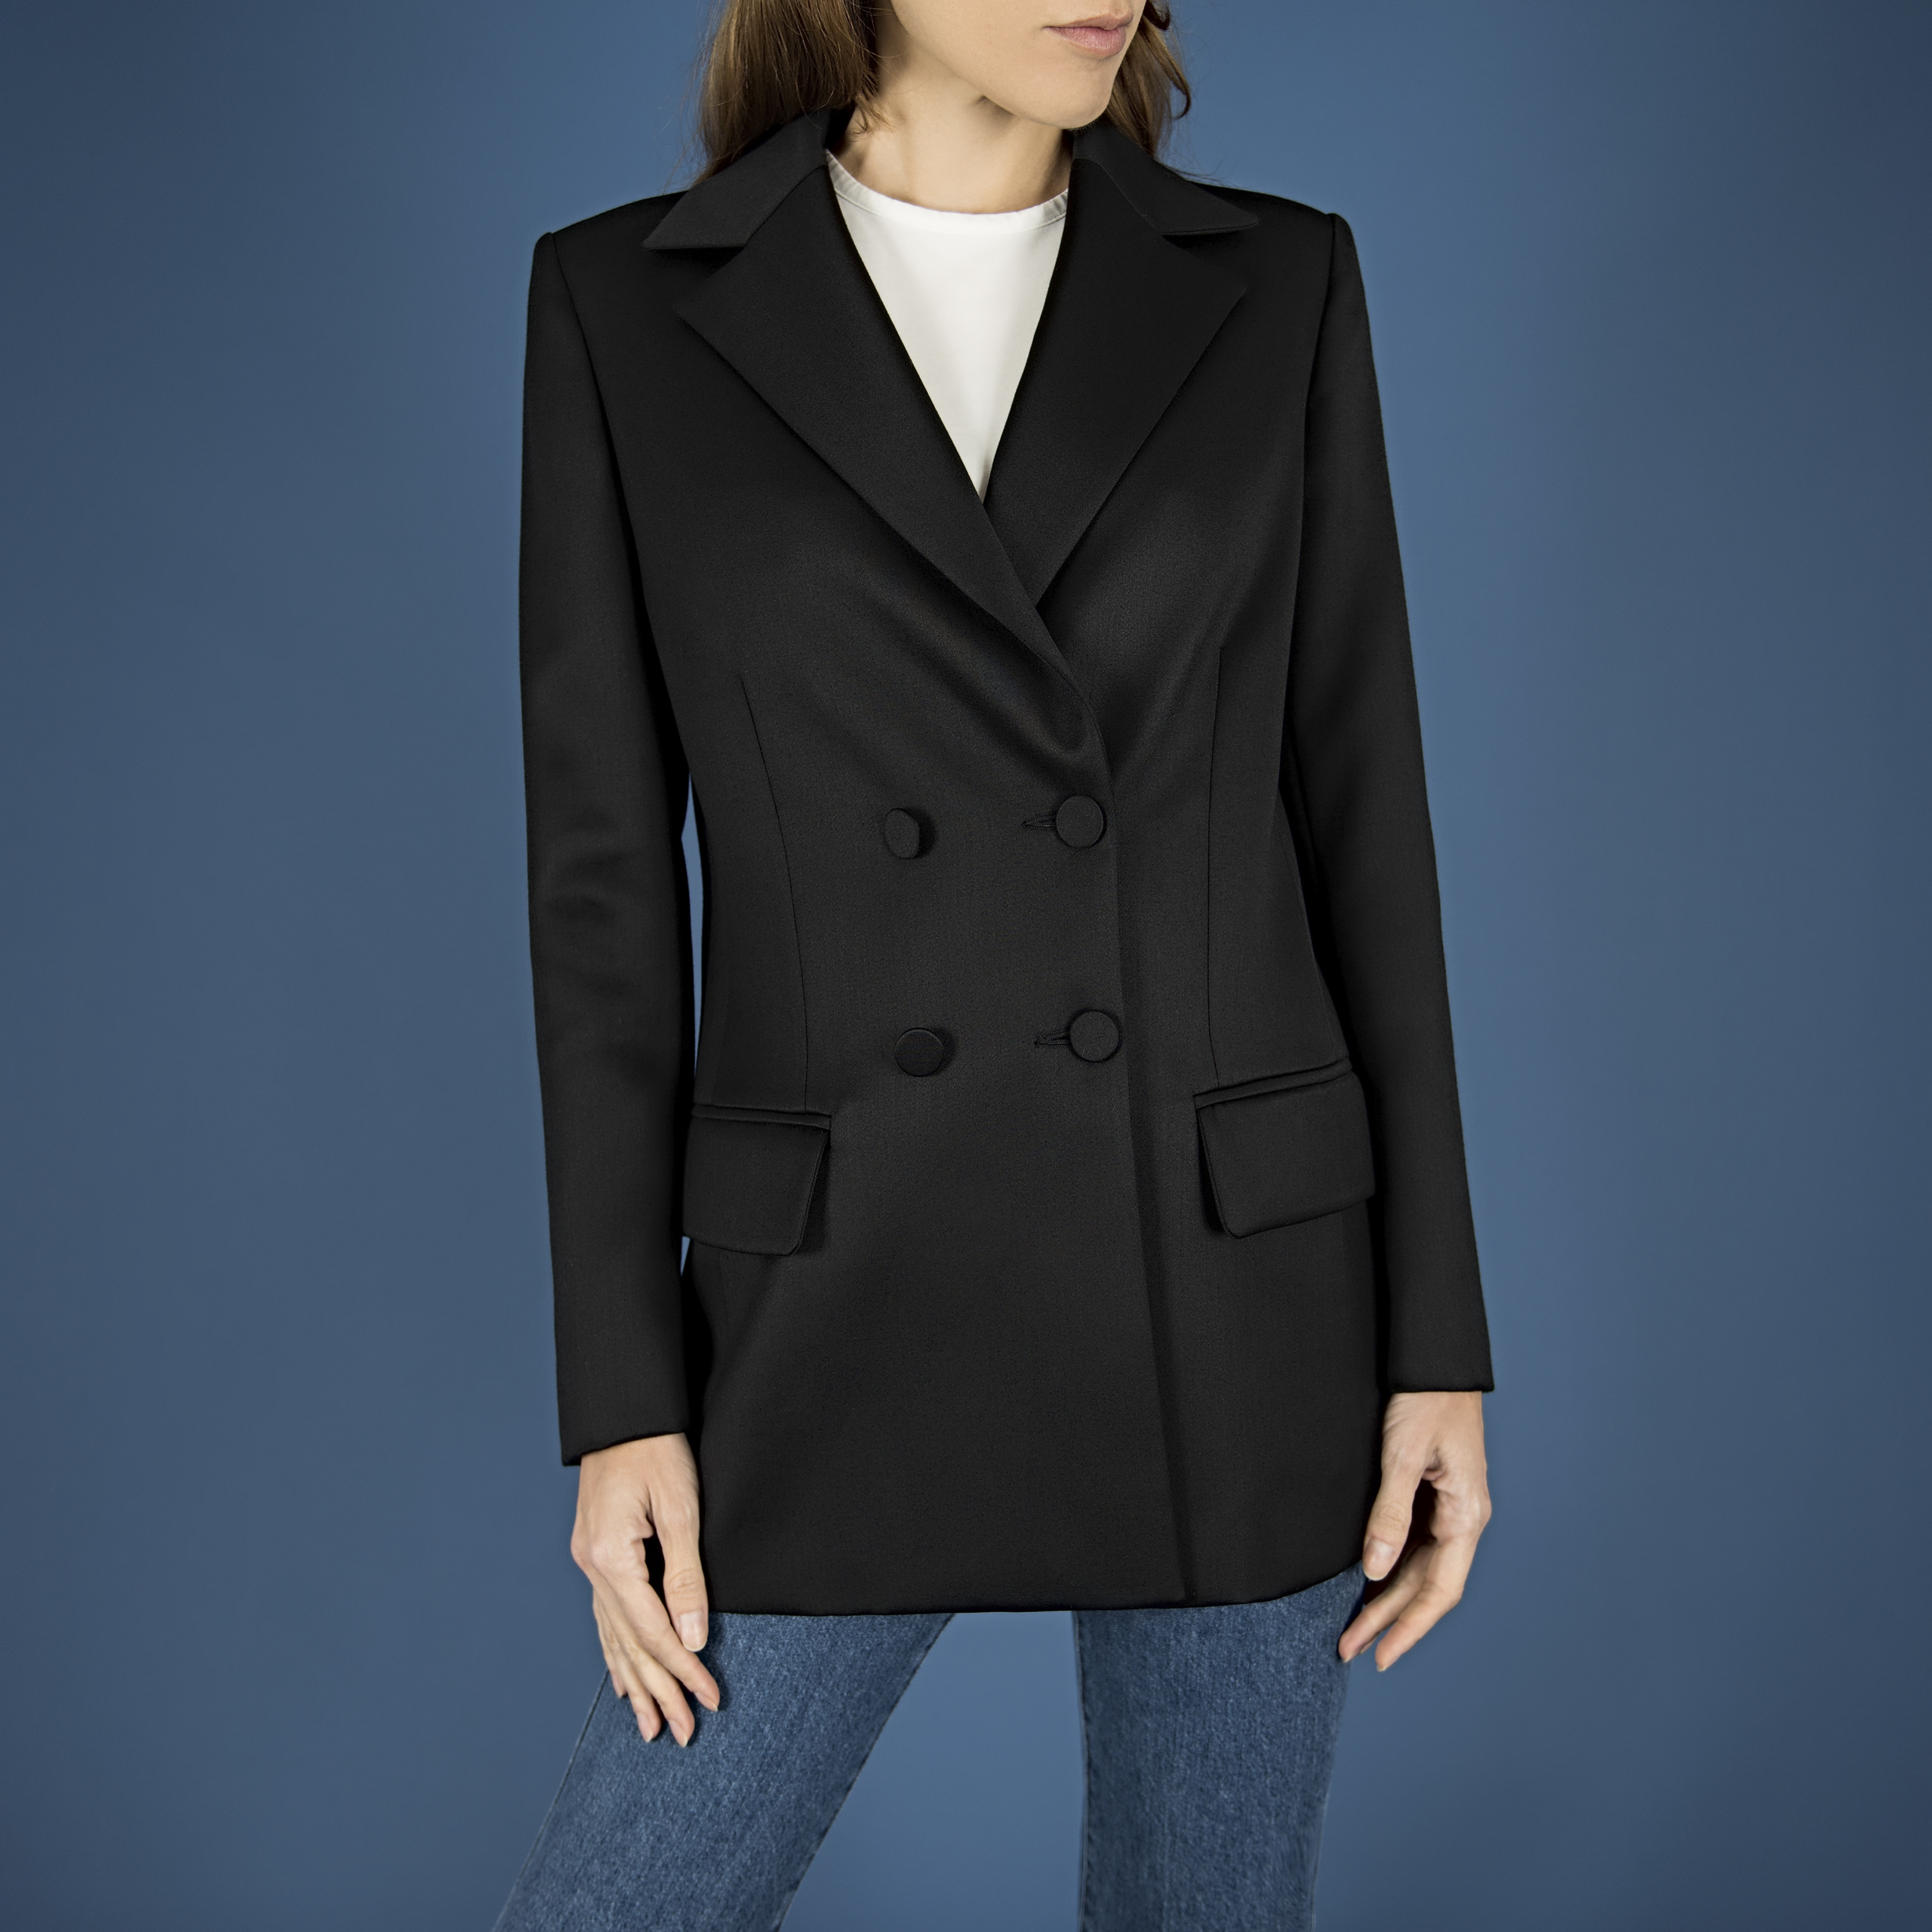 Le Rú's Bianca blazer in sophisticated black, featuring a structured silhouette and notched lapels, exudes modern elegance.